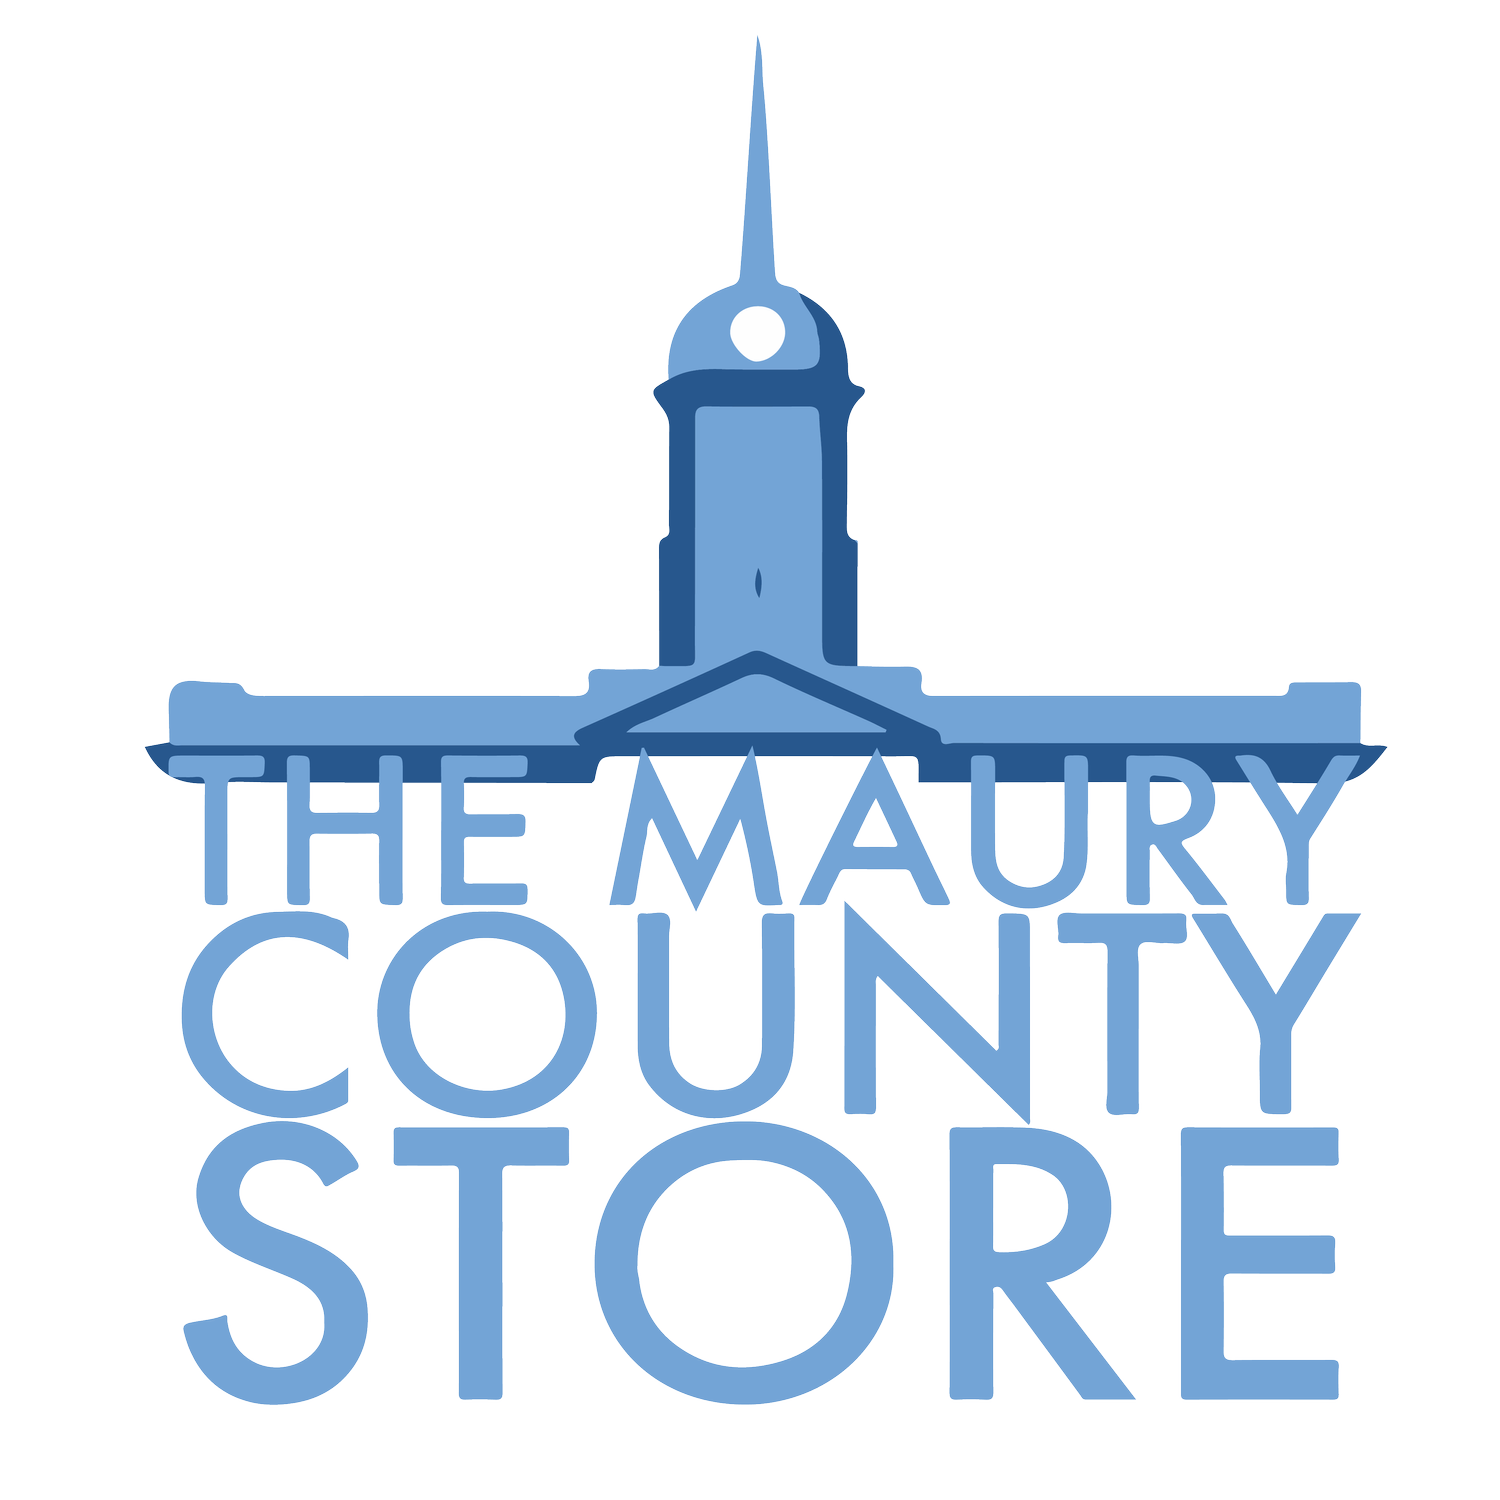 The Maury County Store